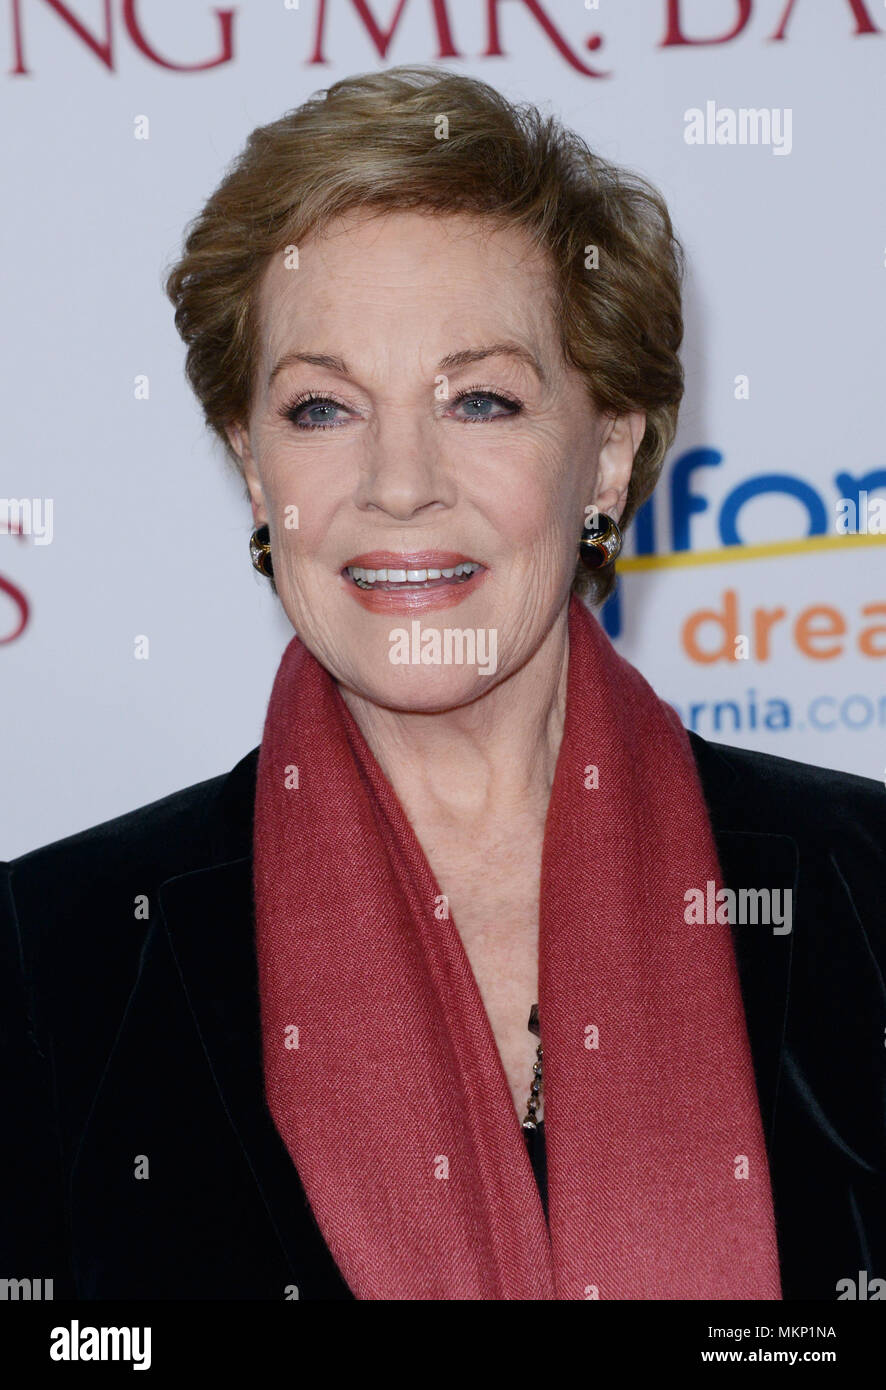 Julie Andrews  at  the premiere of 'Saving Mr. Banks' on the Disney Studio Lo in Burbank.Julie Andrews 020 Red Carpet Event, Vertical, USA, Film Industry, Celebrities,  Photography, Bestof, Arts Culture and Entertainment, Topix Celebrities fashion /  Vertical, Best of, Event in Hollywood Life - California,  Red Carpet and backstage, USA, Film Industry, Celebrities,  movie celebrities, TV celebrities, Music celebrities, Photography, Bestof, Arts Culture and Entertainment,  Topix, headshot, vertical, one person,, from the year , 2013, inquiry tsuni@Gamma-USA.com Stock Photo